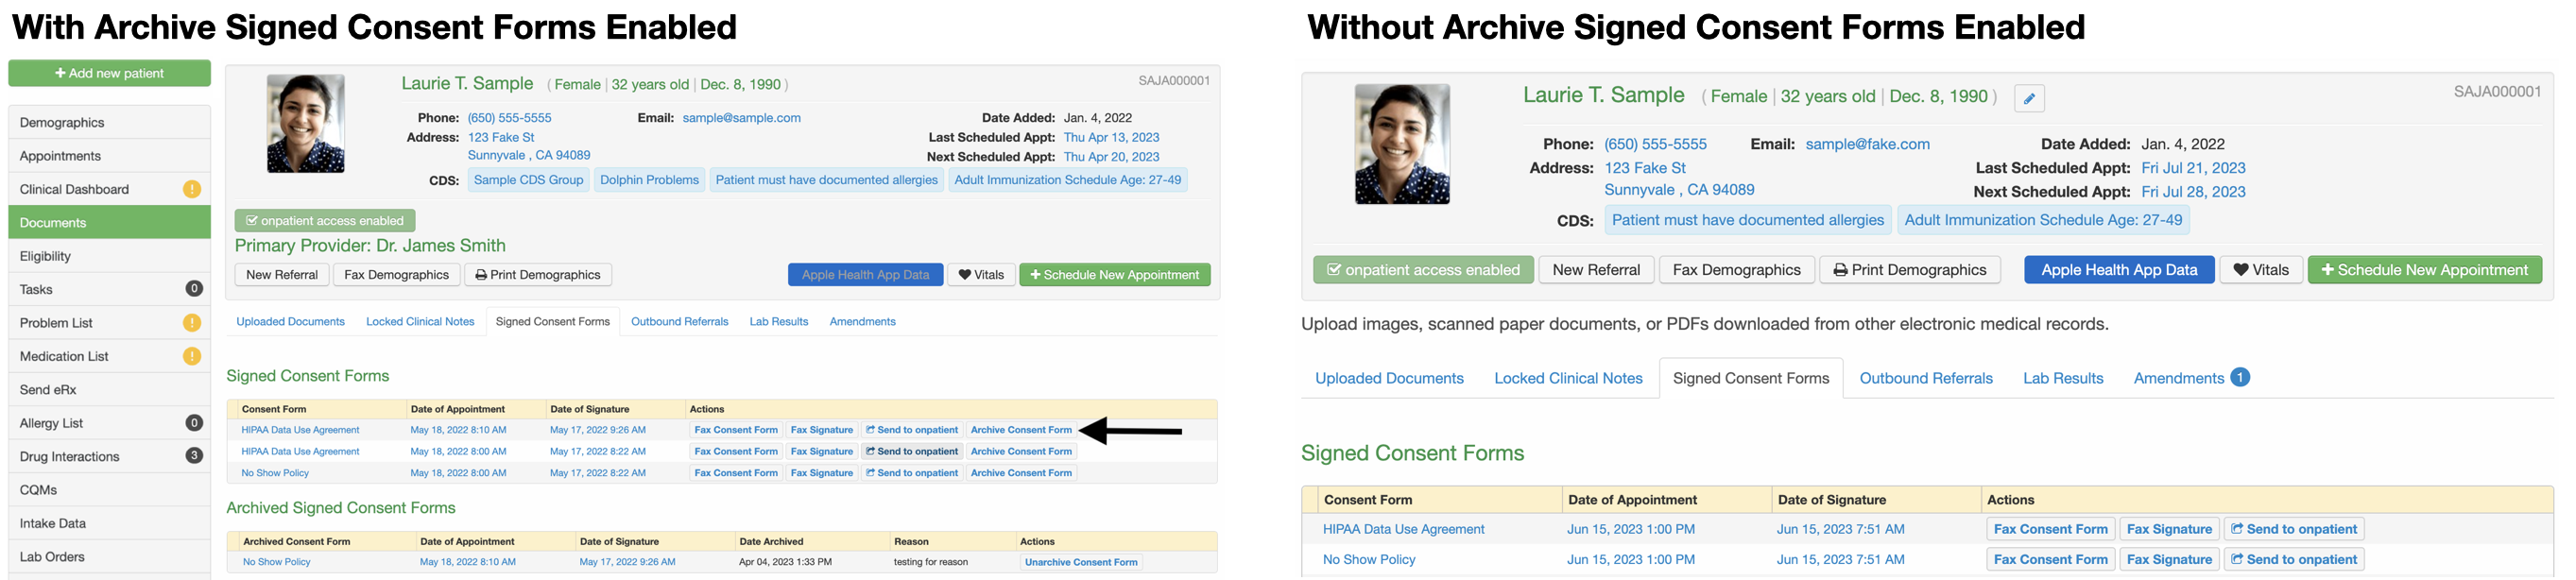 Archive Signed Consent Forms Permission Enabled Disabled Side by Side.png